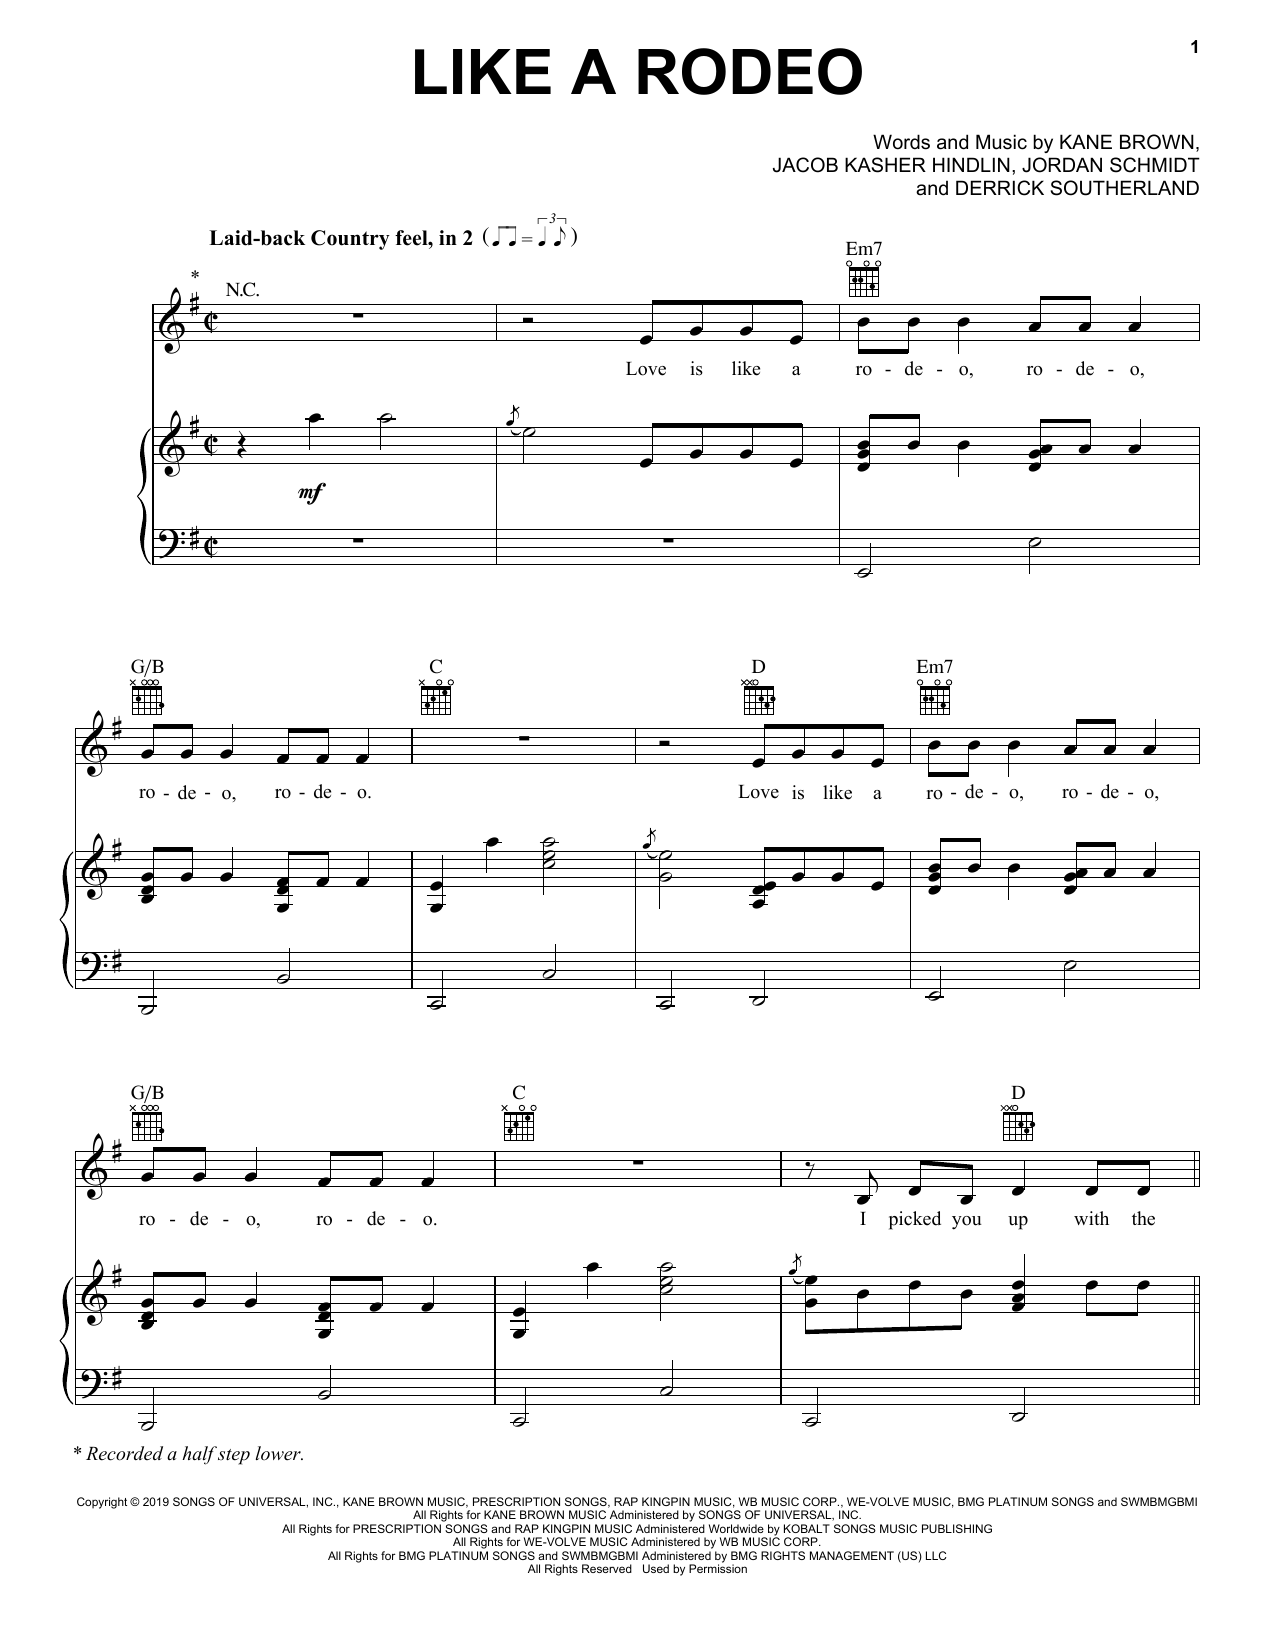 Kane Brown Like A Rodeo sheet music notes and chords. Download Printable PDF.